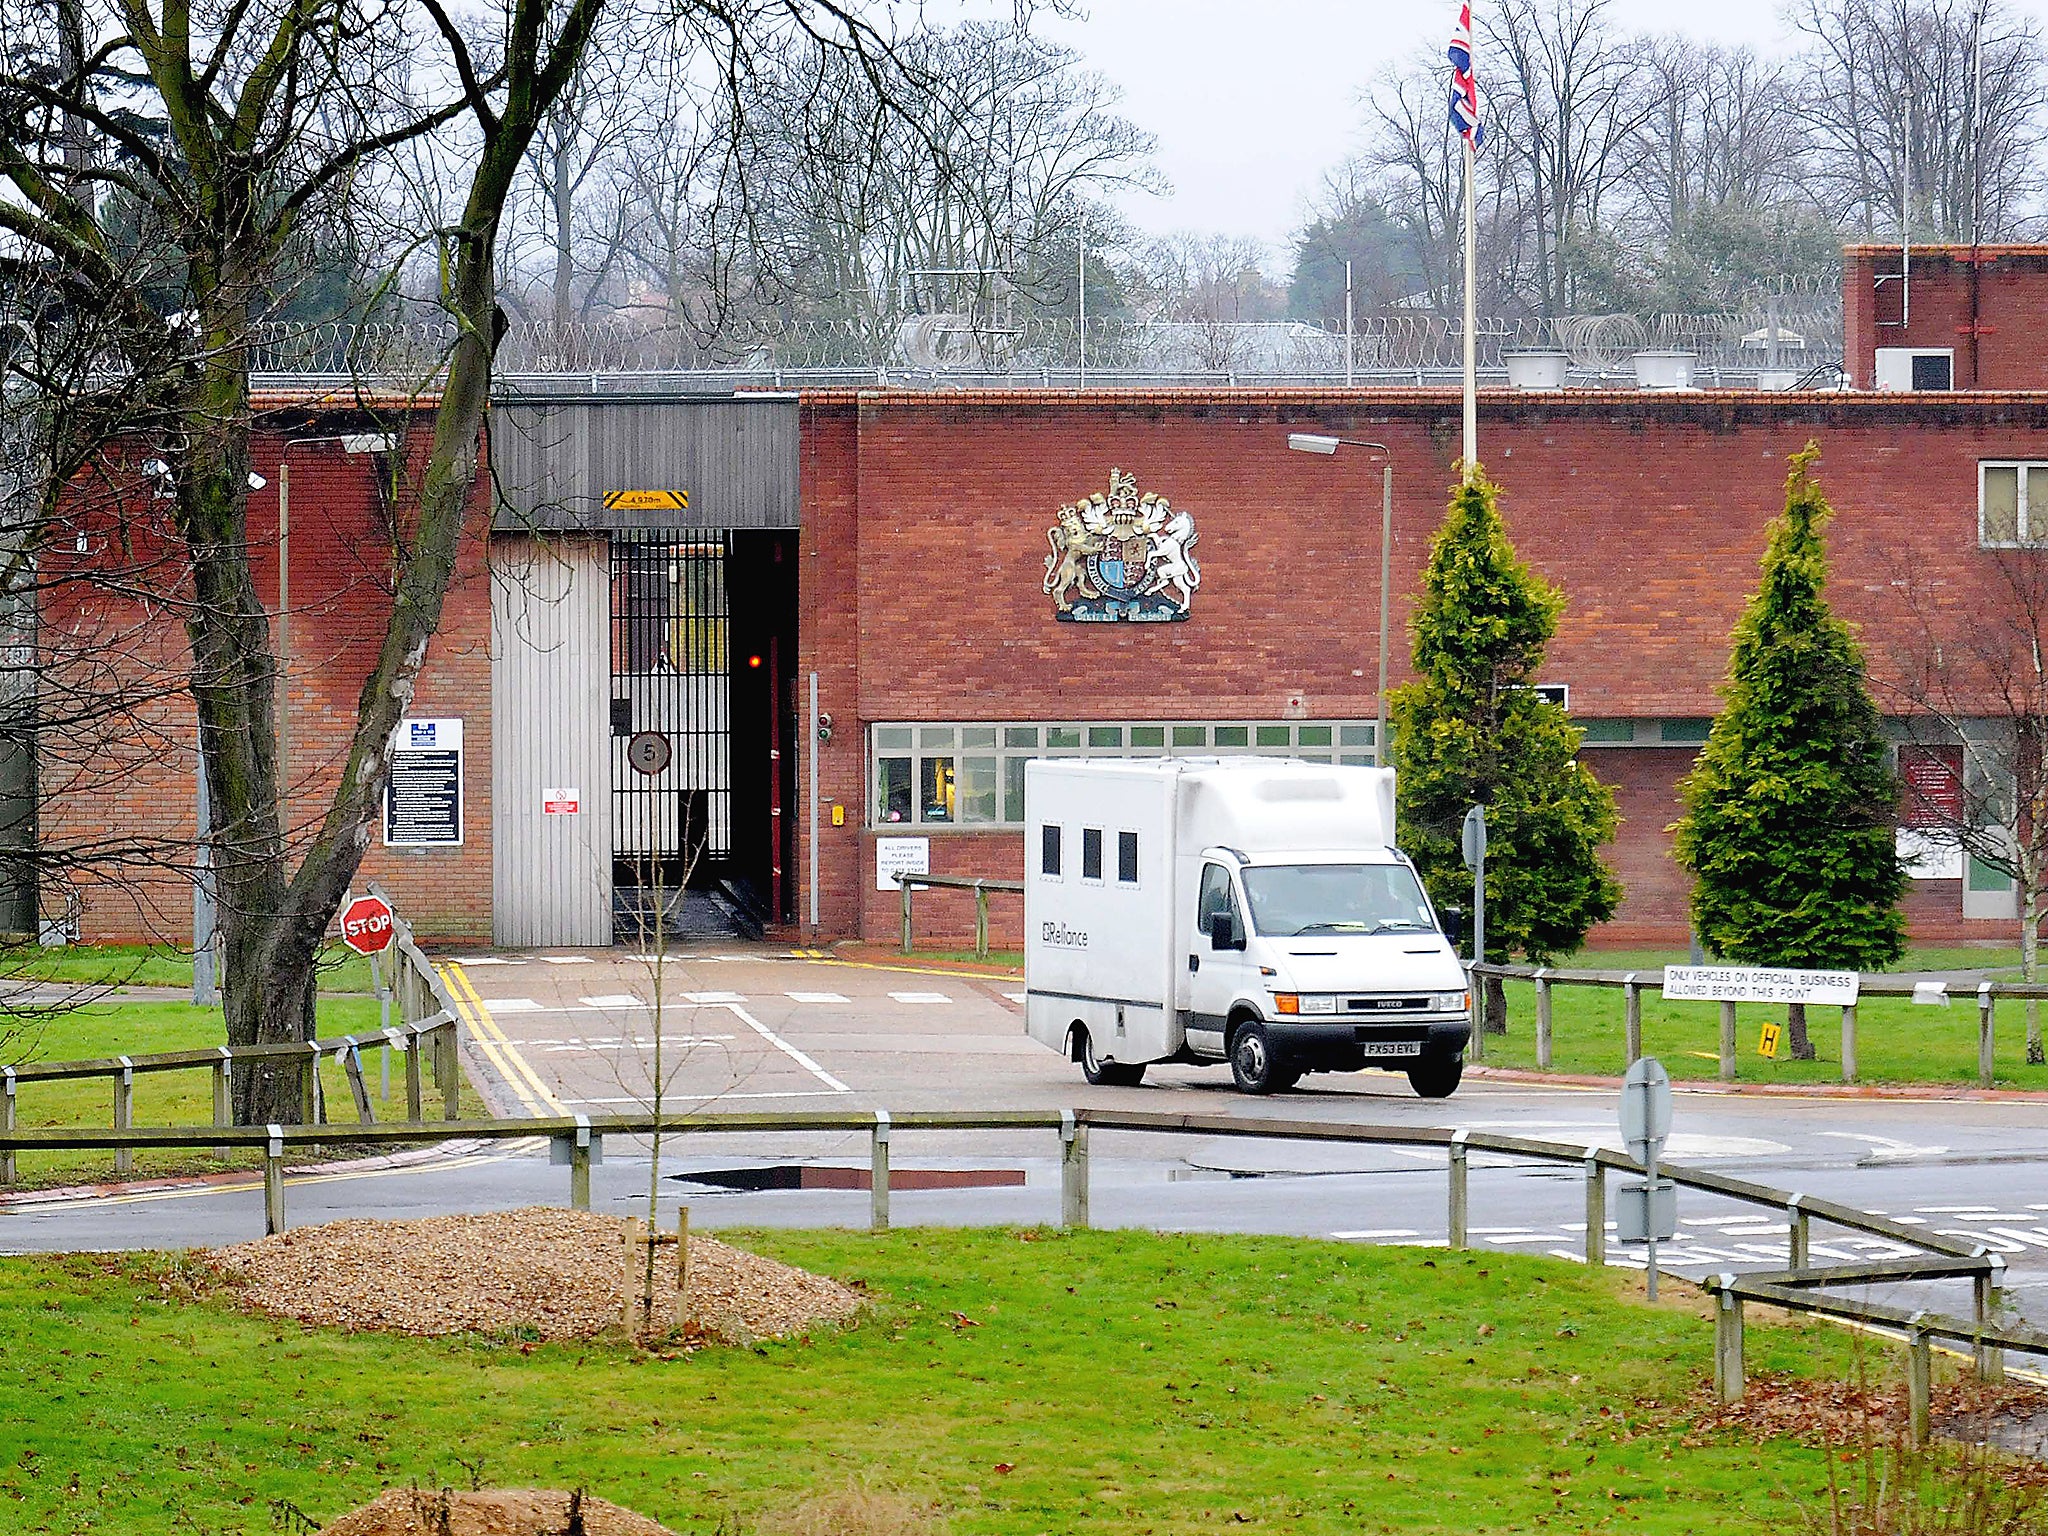 A graduate who worked at Feltham Young Offenders Institution criticised the scheme